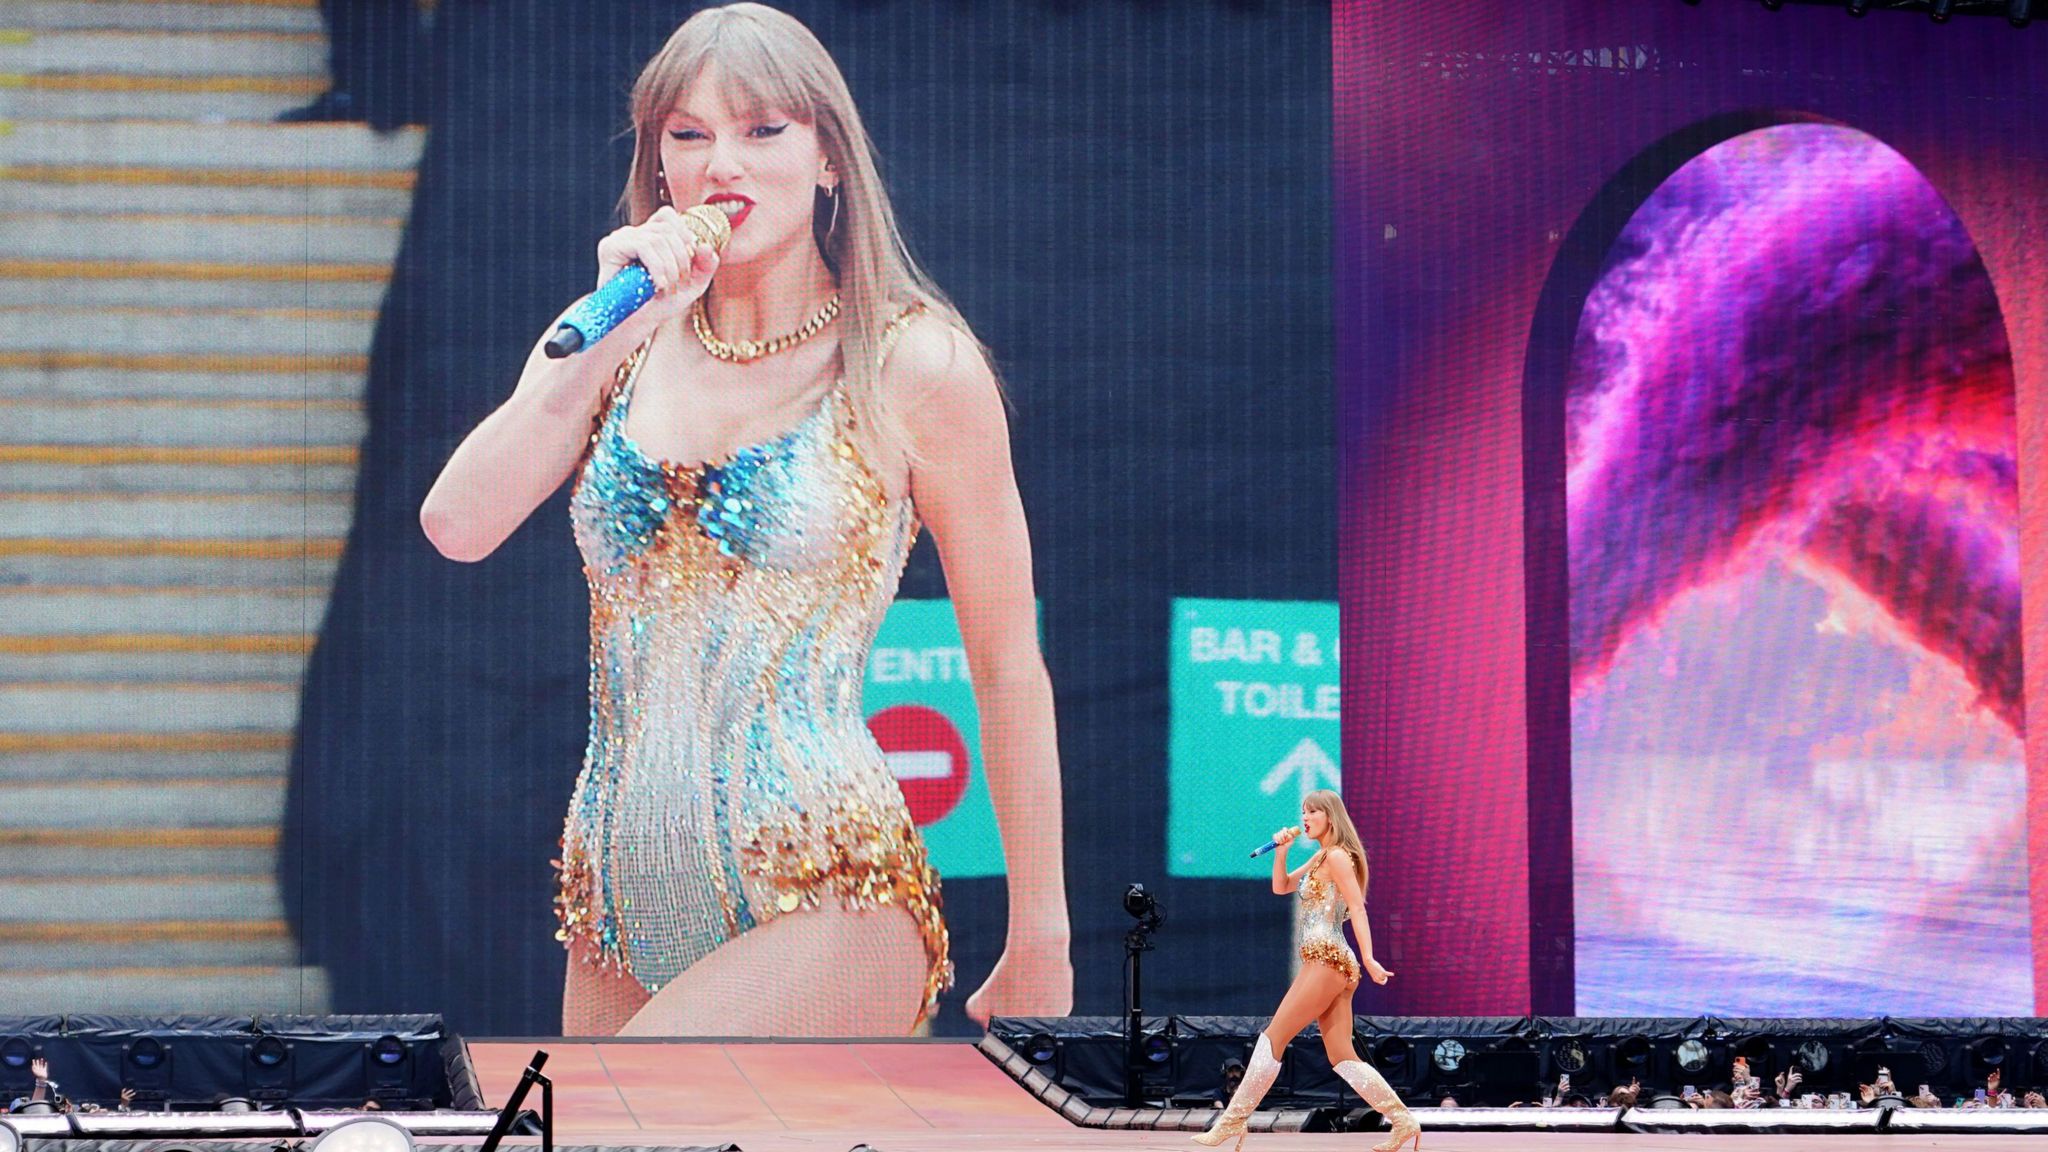 Taylor Swift performing at the Eras tour in Wembley